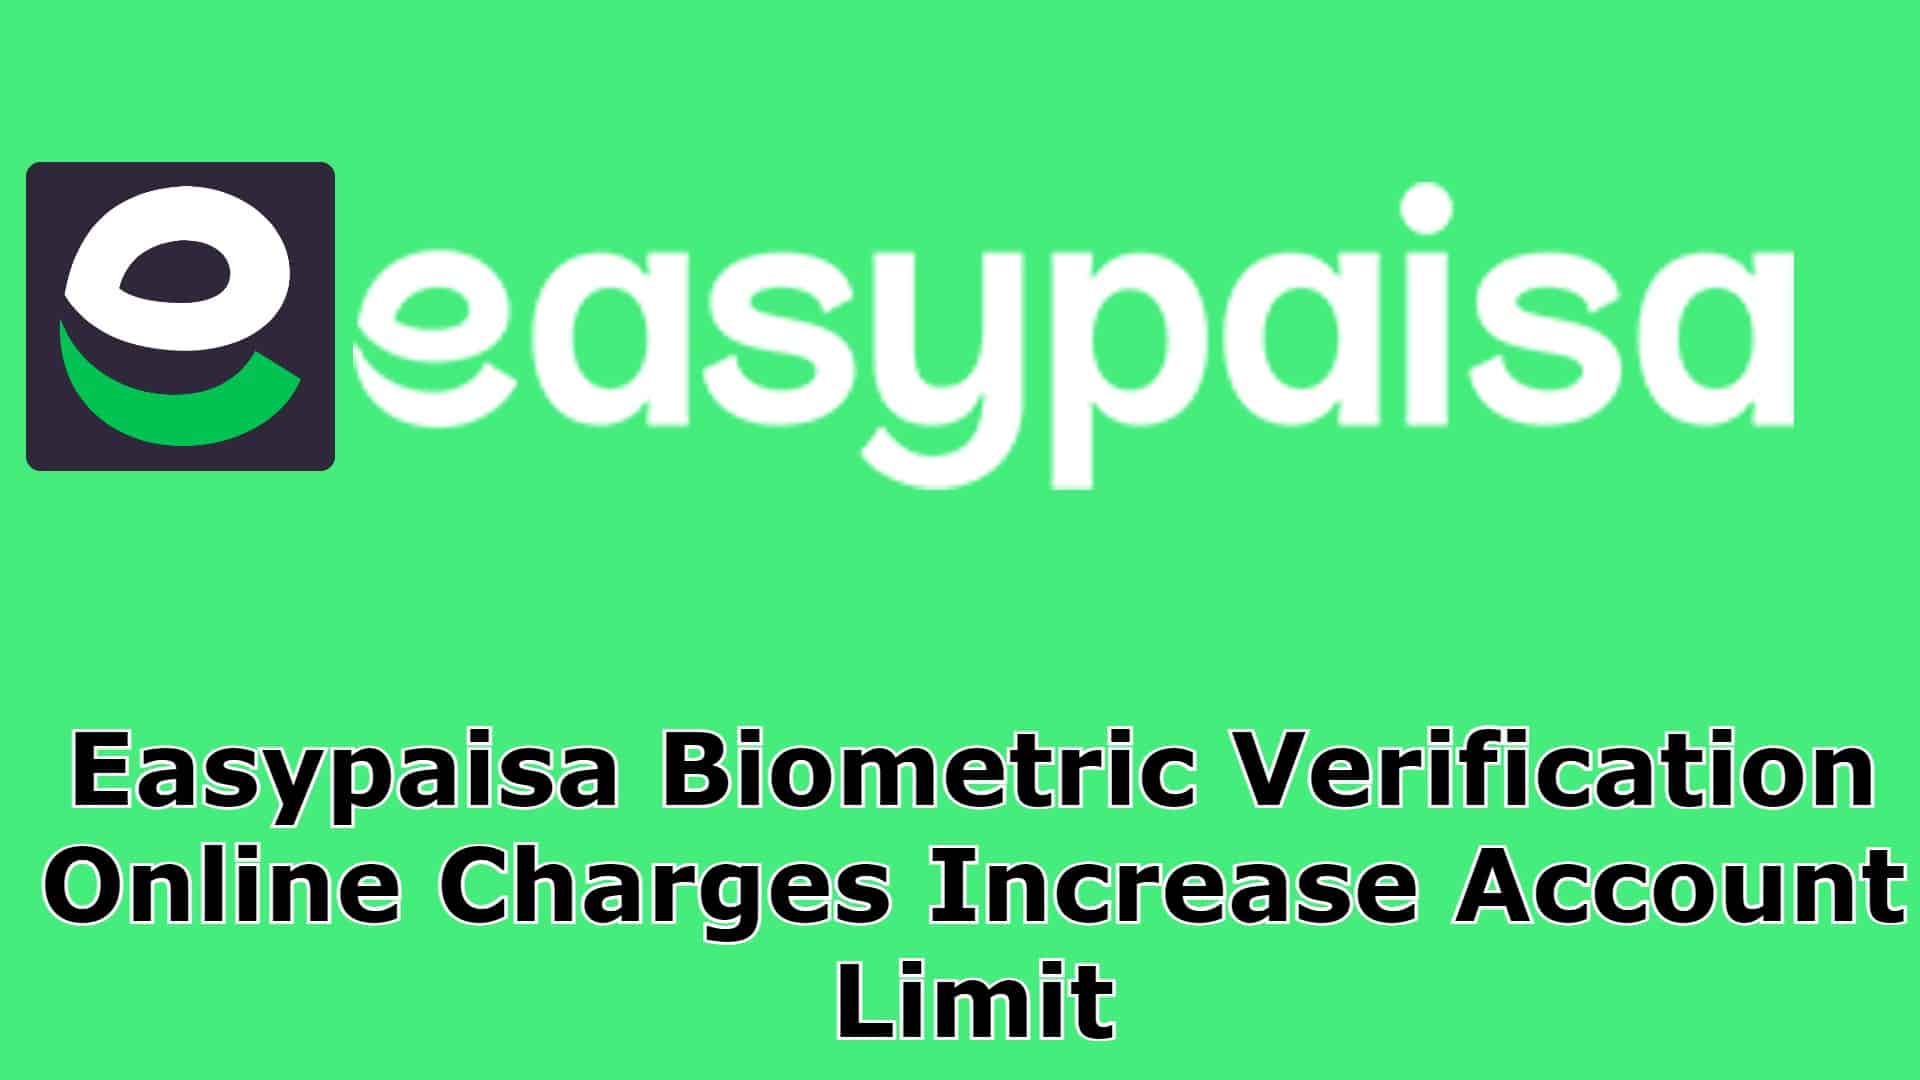 Easypaisa Biometric Verification Online Charges Increase Account Limit